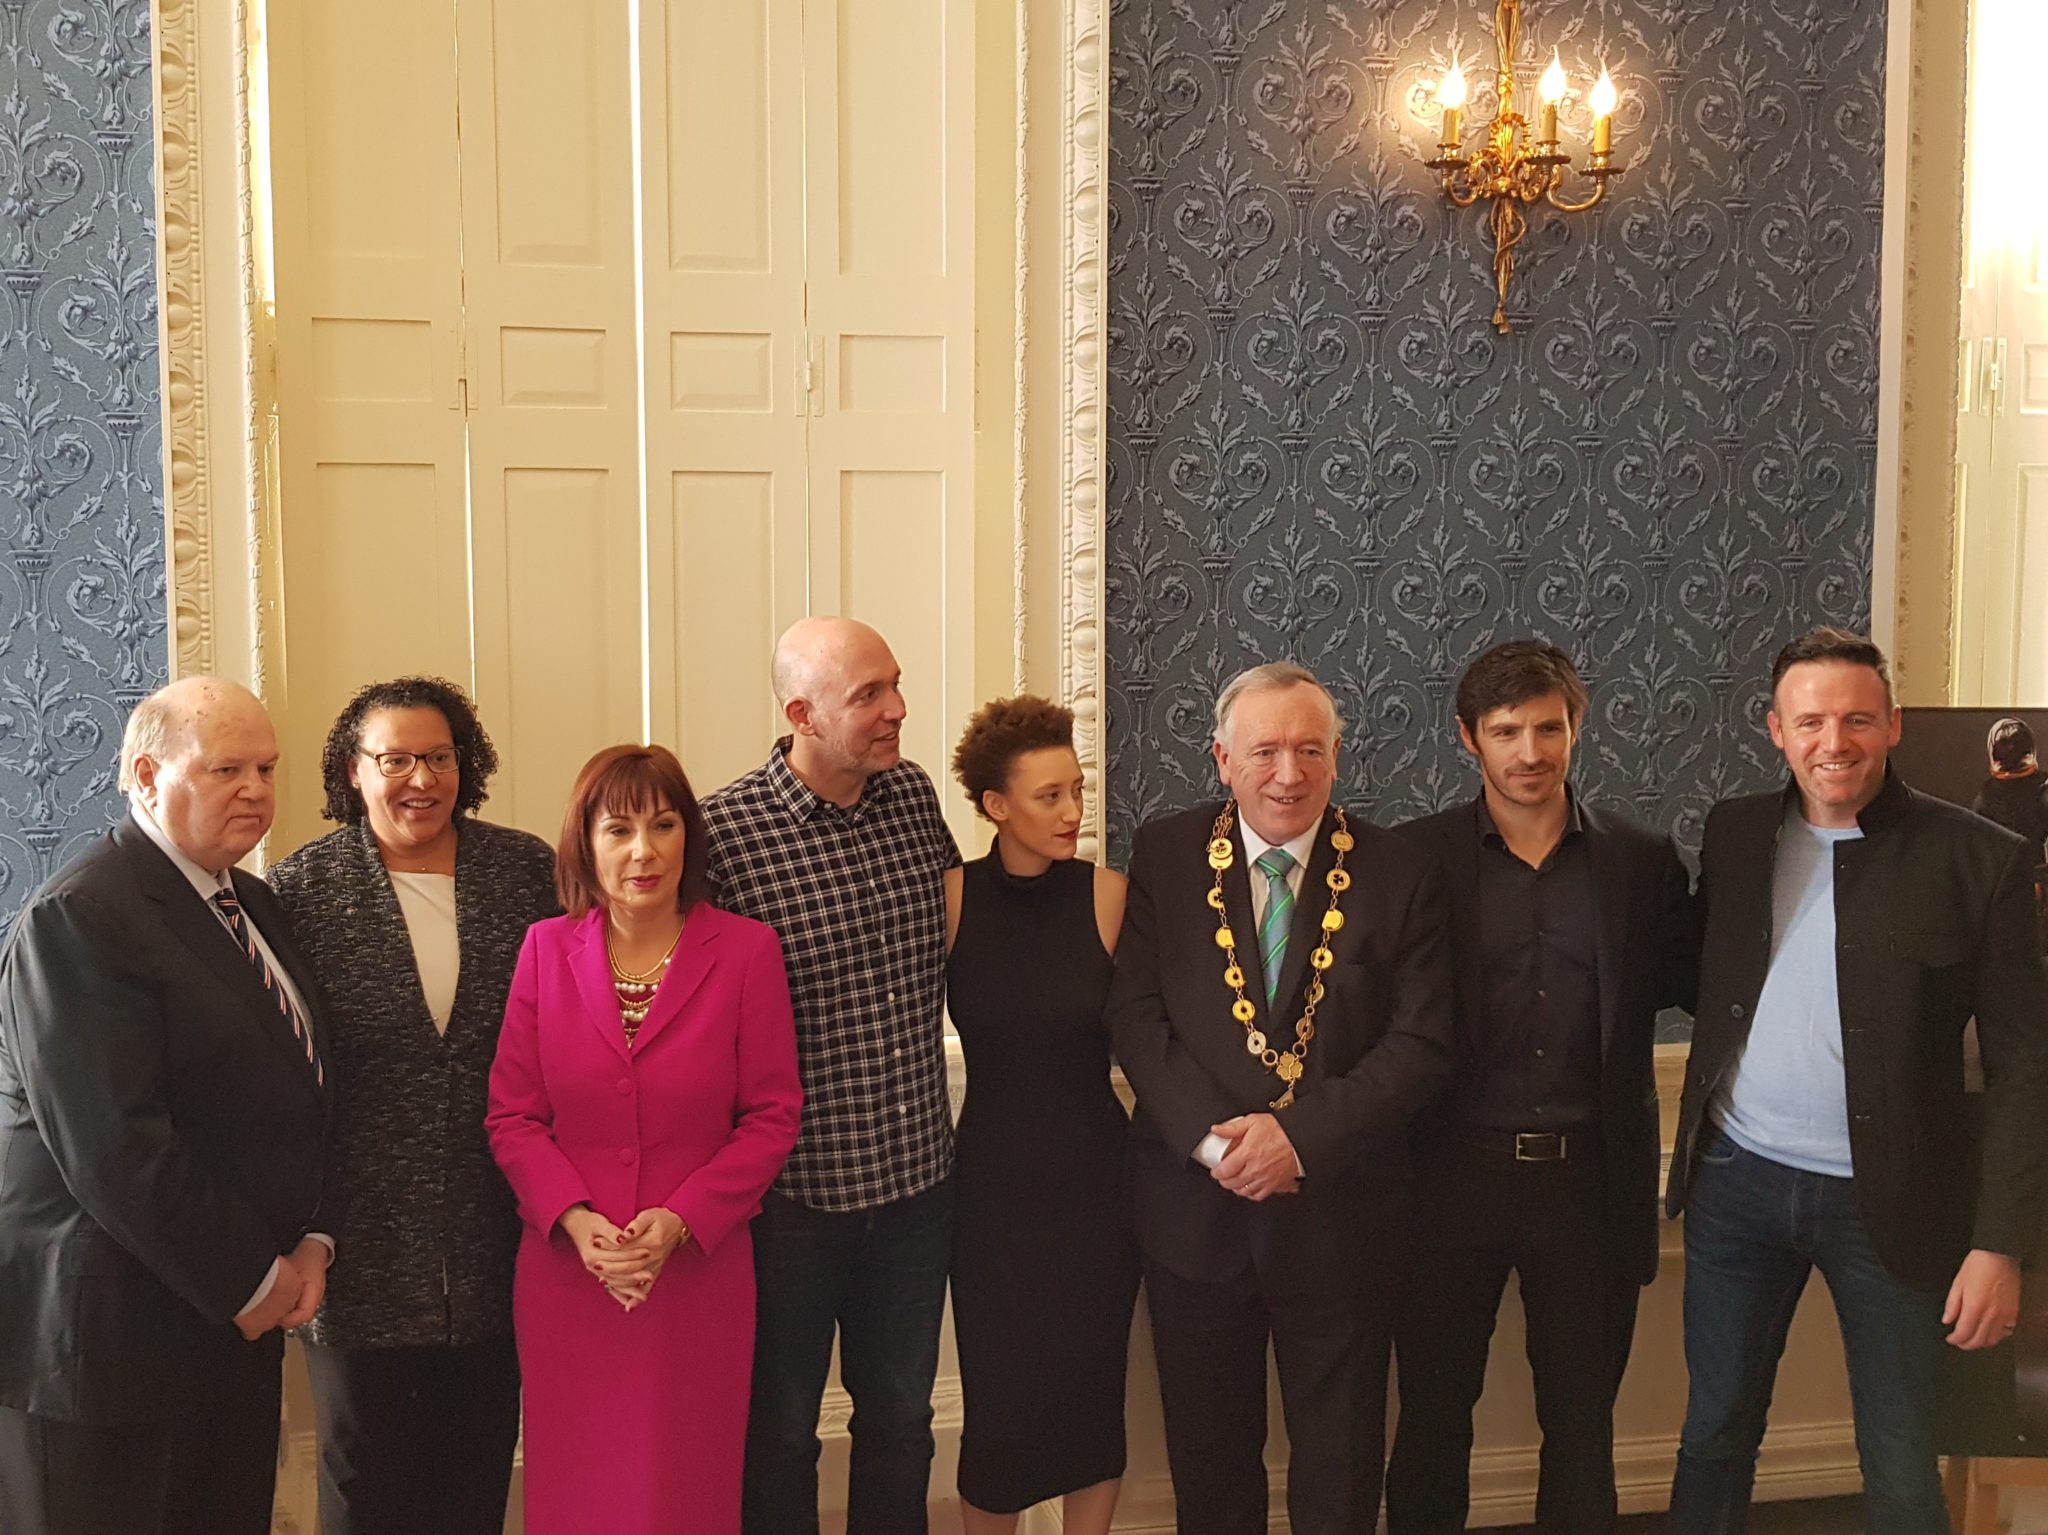 Nightflyers Production Launch at the Merrion Hotel, Dublin